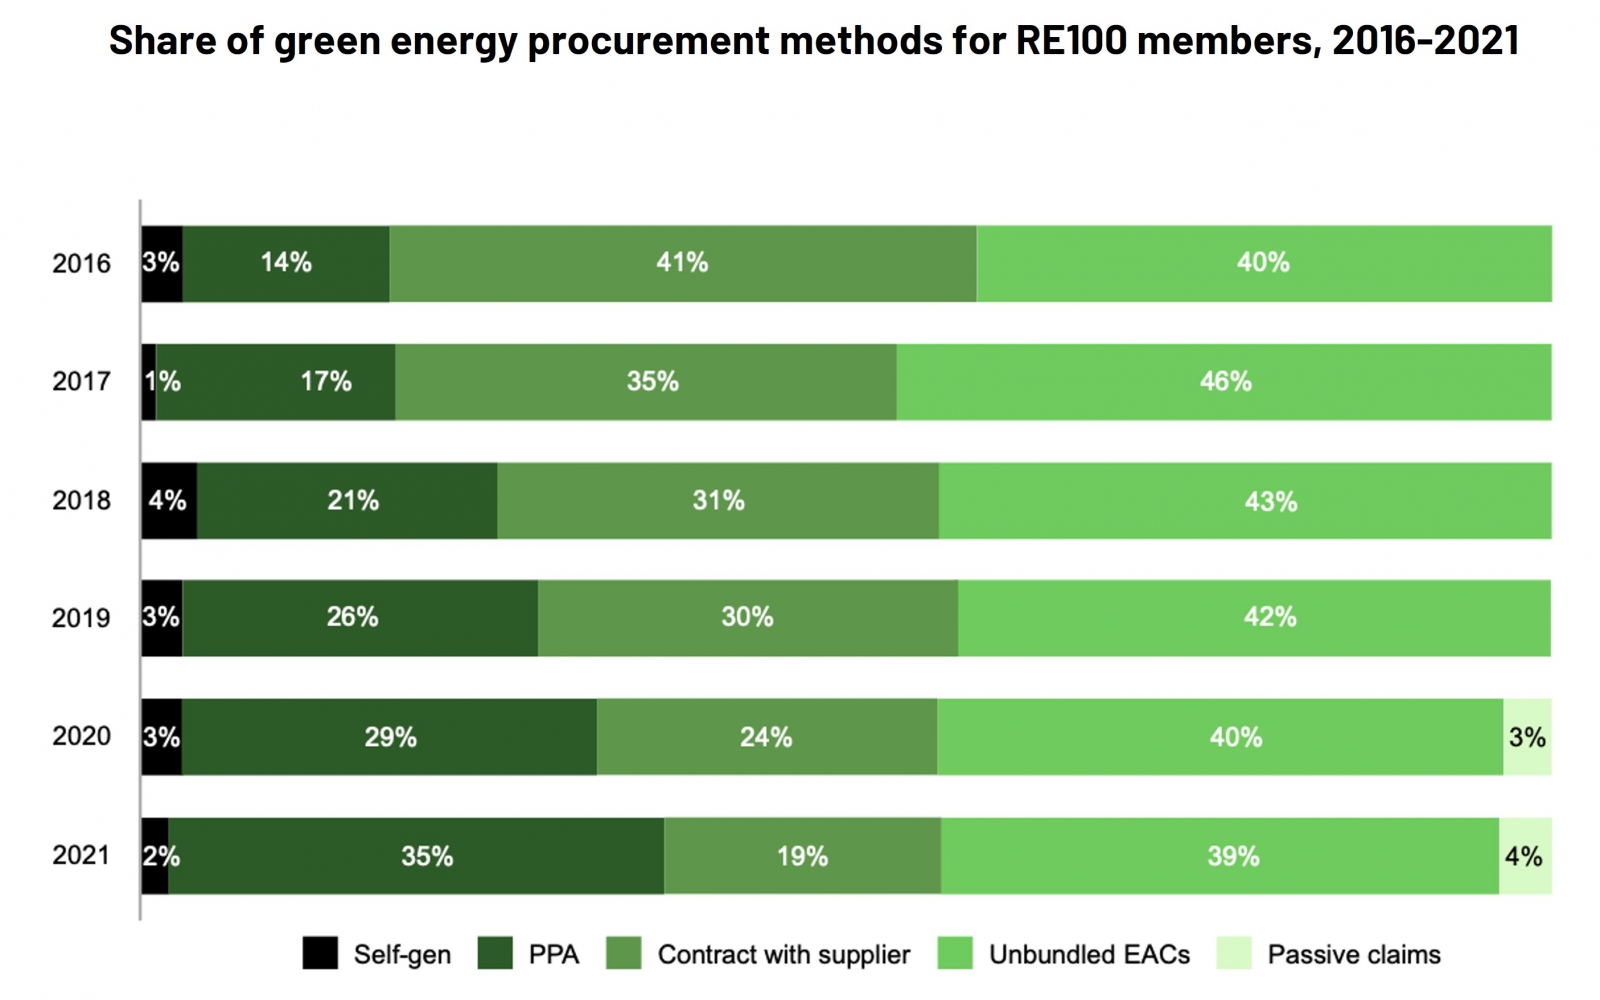 Share of green energy procurement methods for RE100 members, 2016-2021